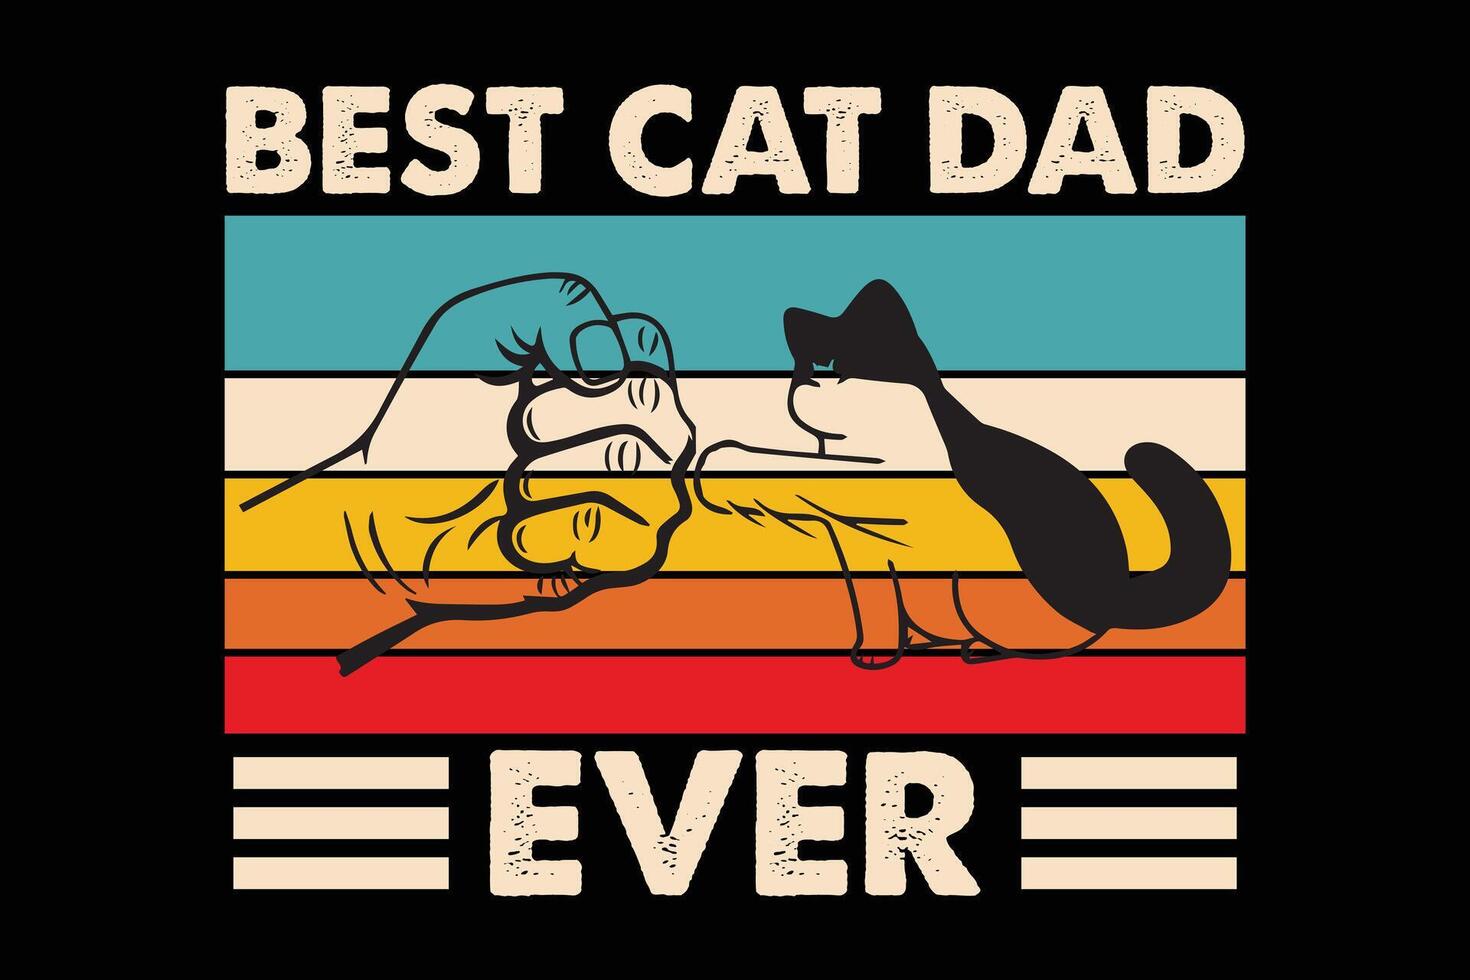 Best Cat Dad Ever Retro Vintage Cat Lover Fathers Day T-Shirt Design vector